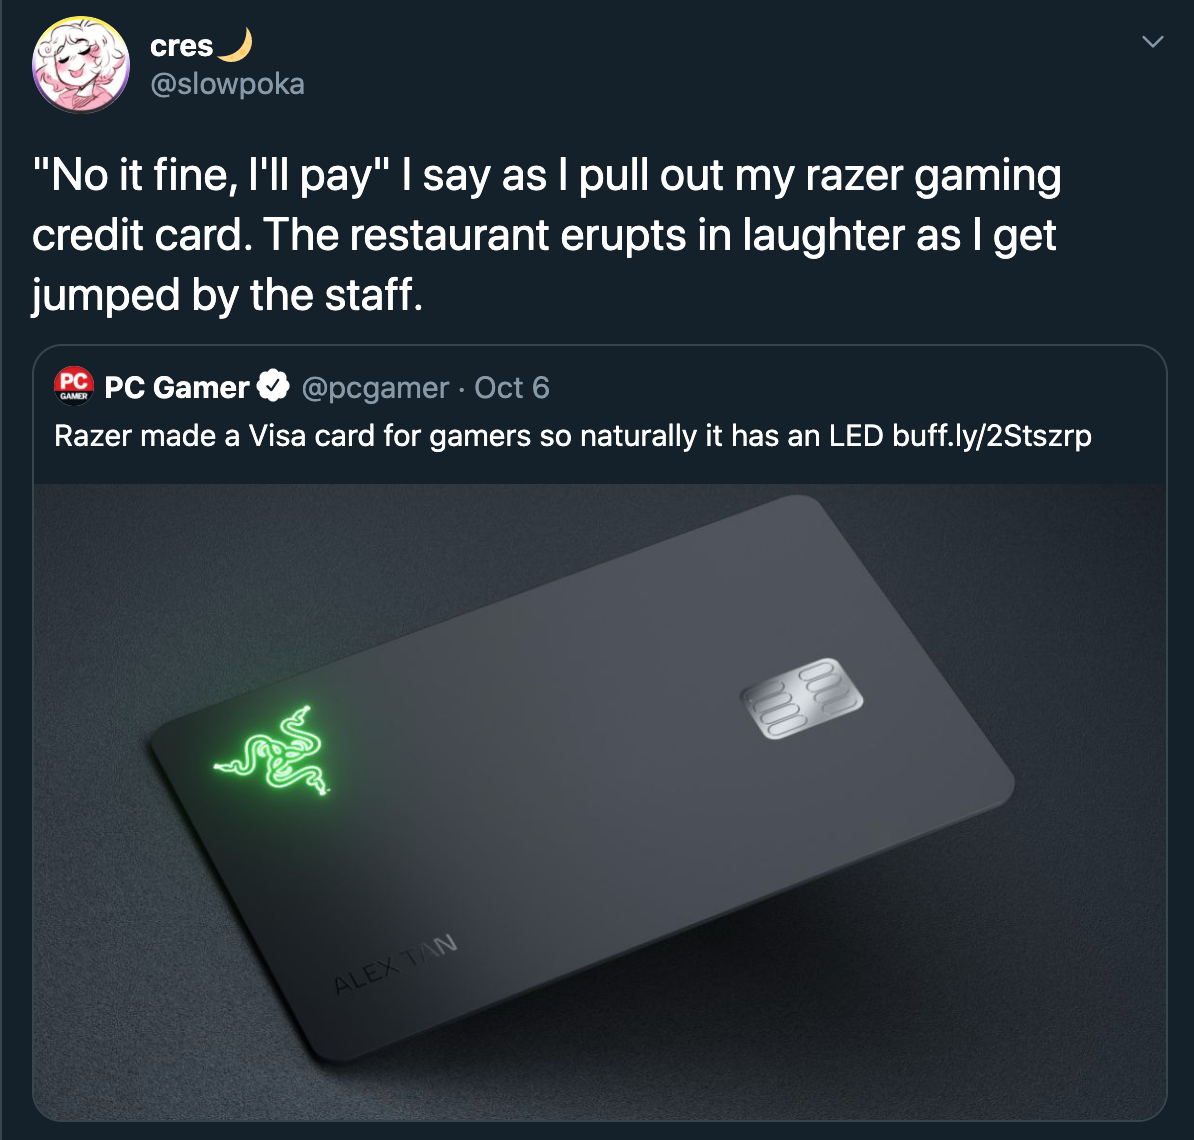 razer gamer credit card reactions - no it's fine I'll pay I say as I pull out my razer gaming credit card. the restaurant erupts in laughter as I get jumped by the staff